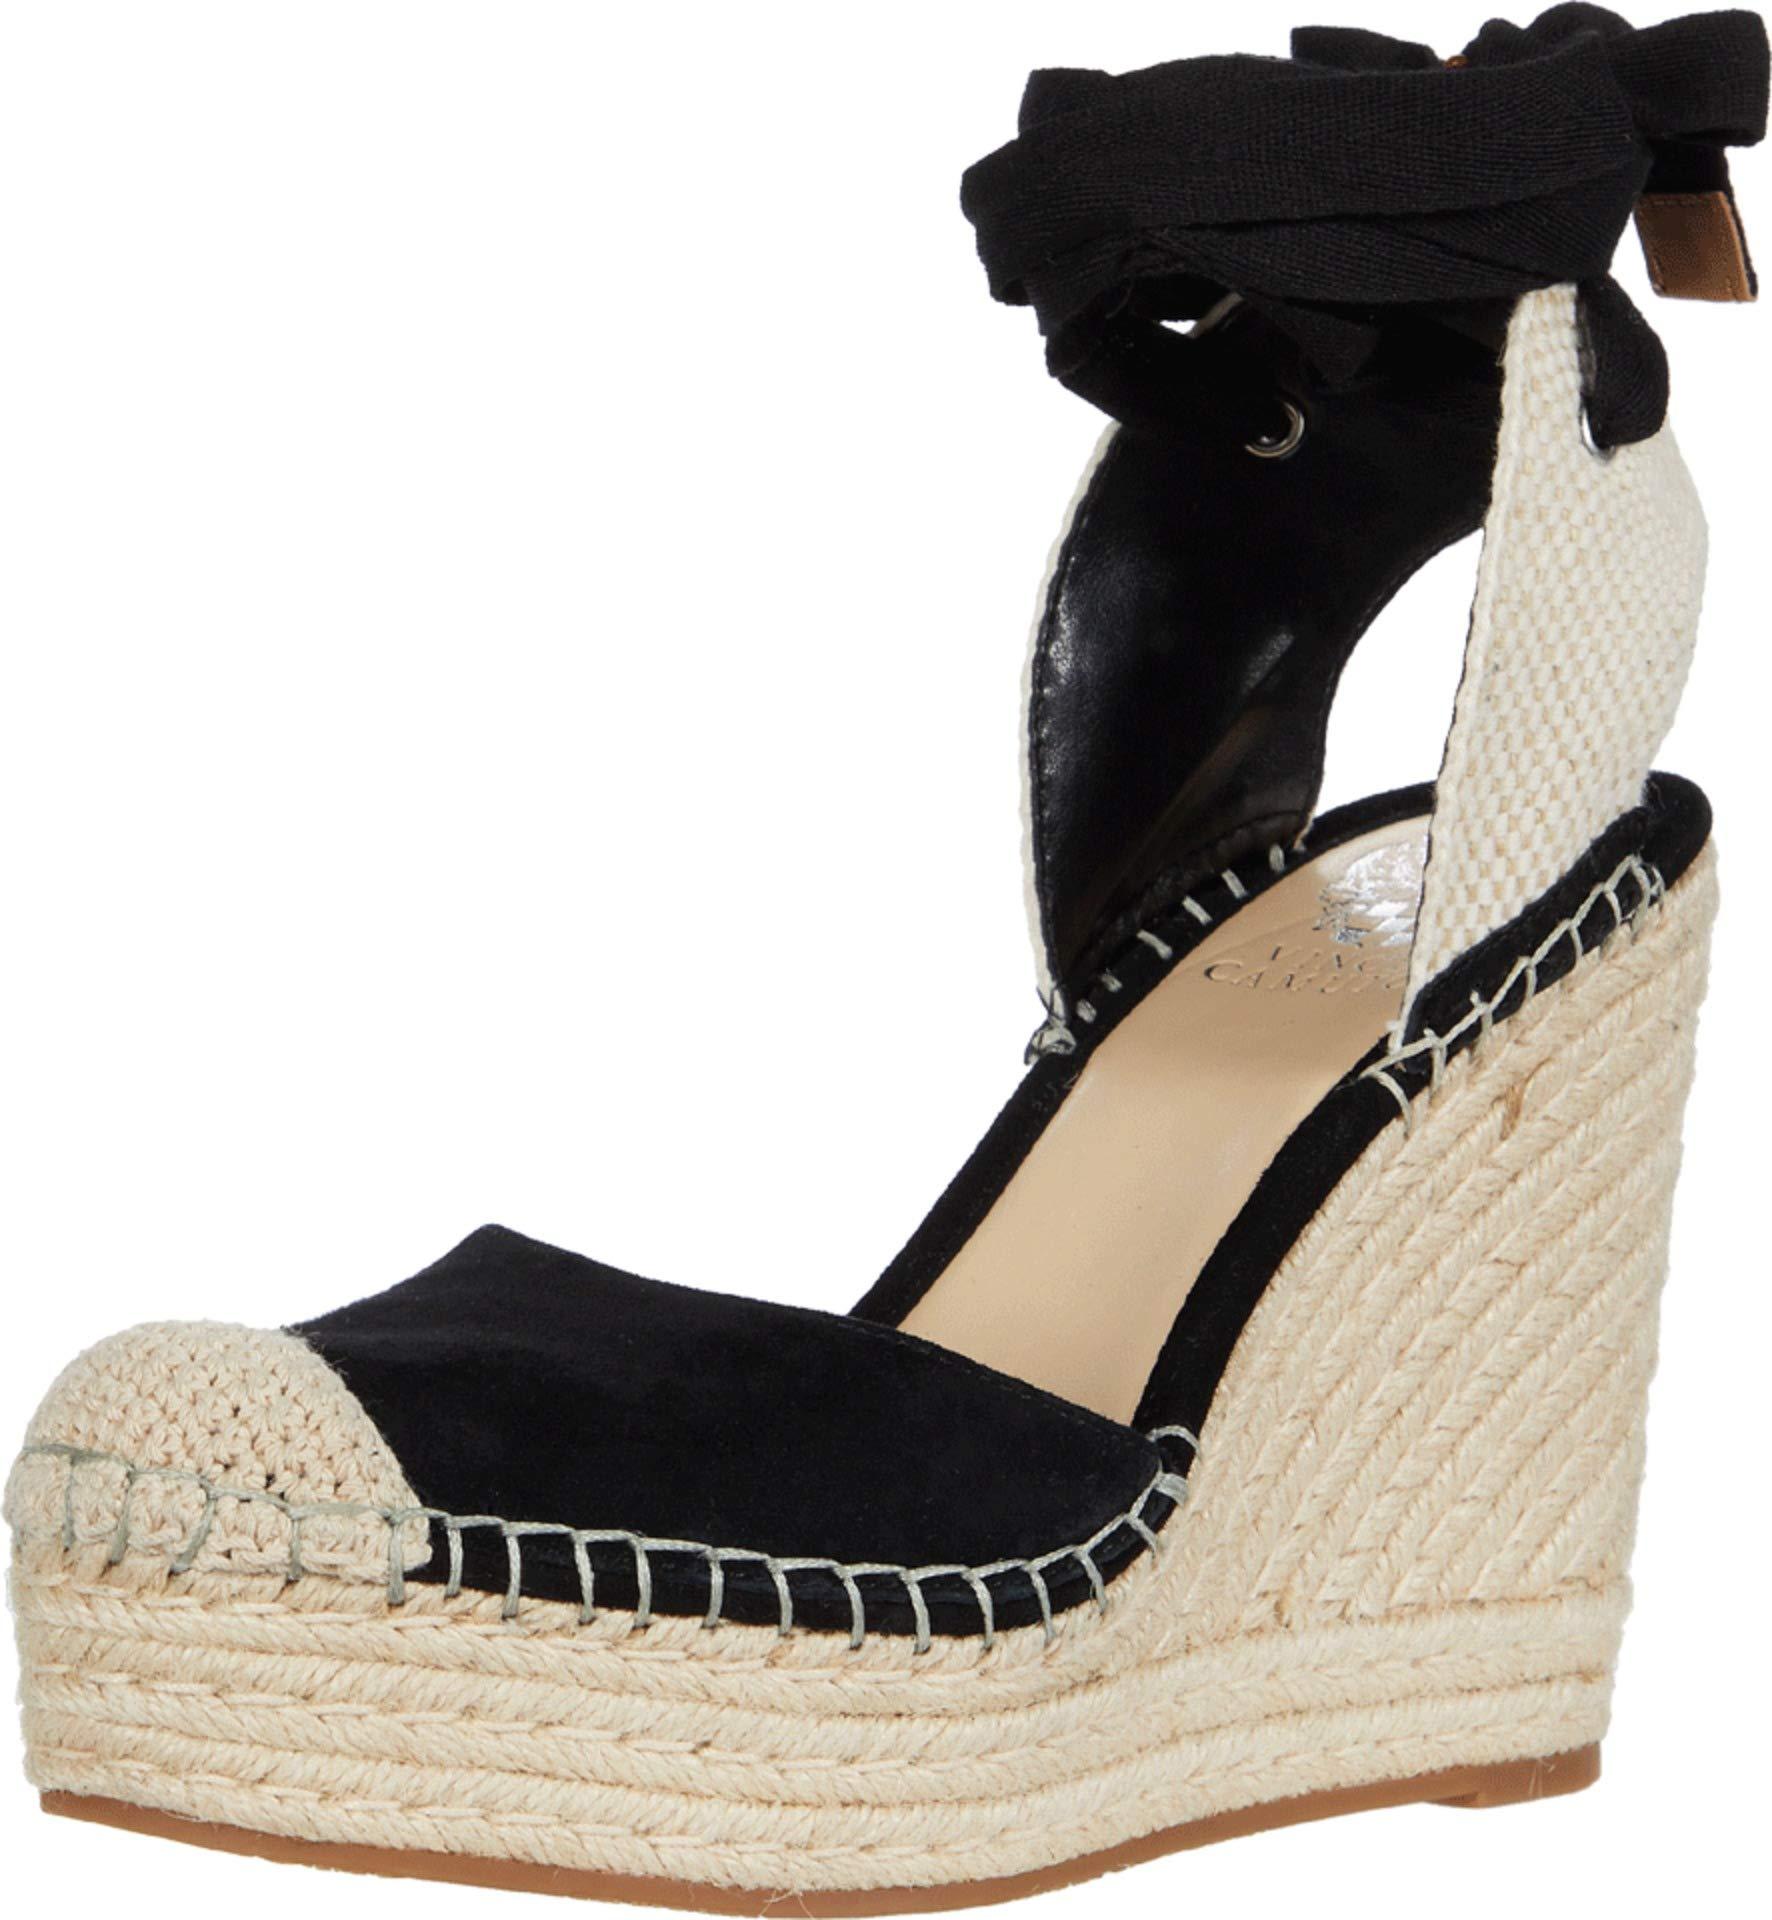 Vince Camuto Leather Alindra Espadrille Wedge Sandal in Black - Save 5% ...